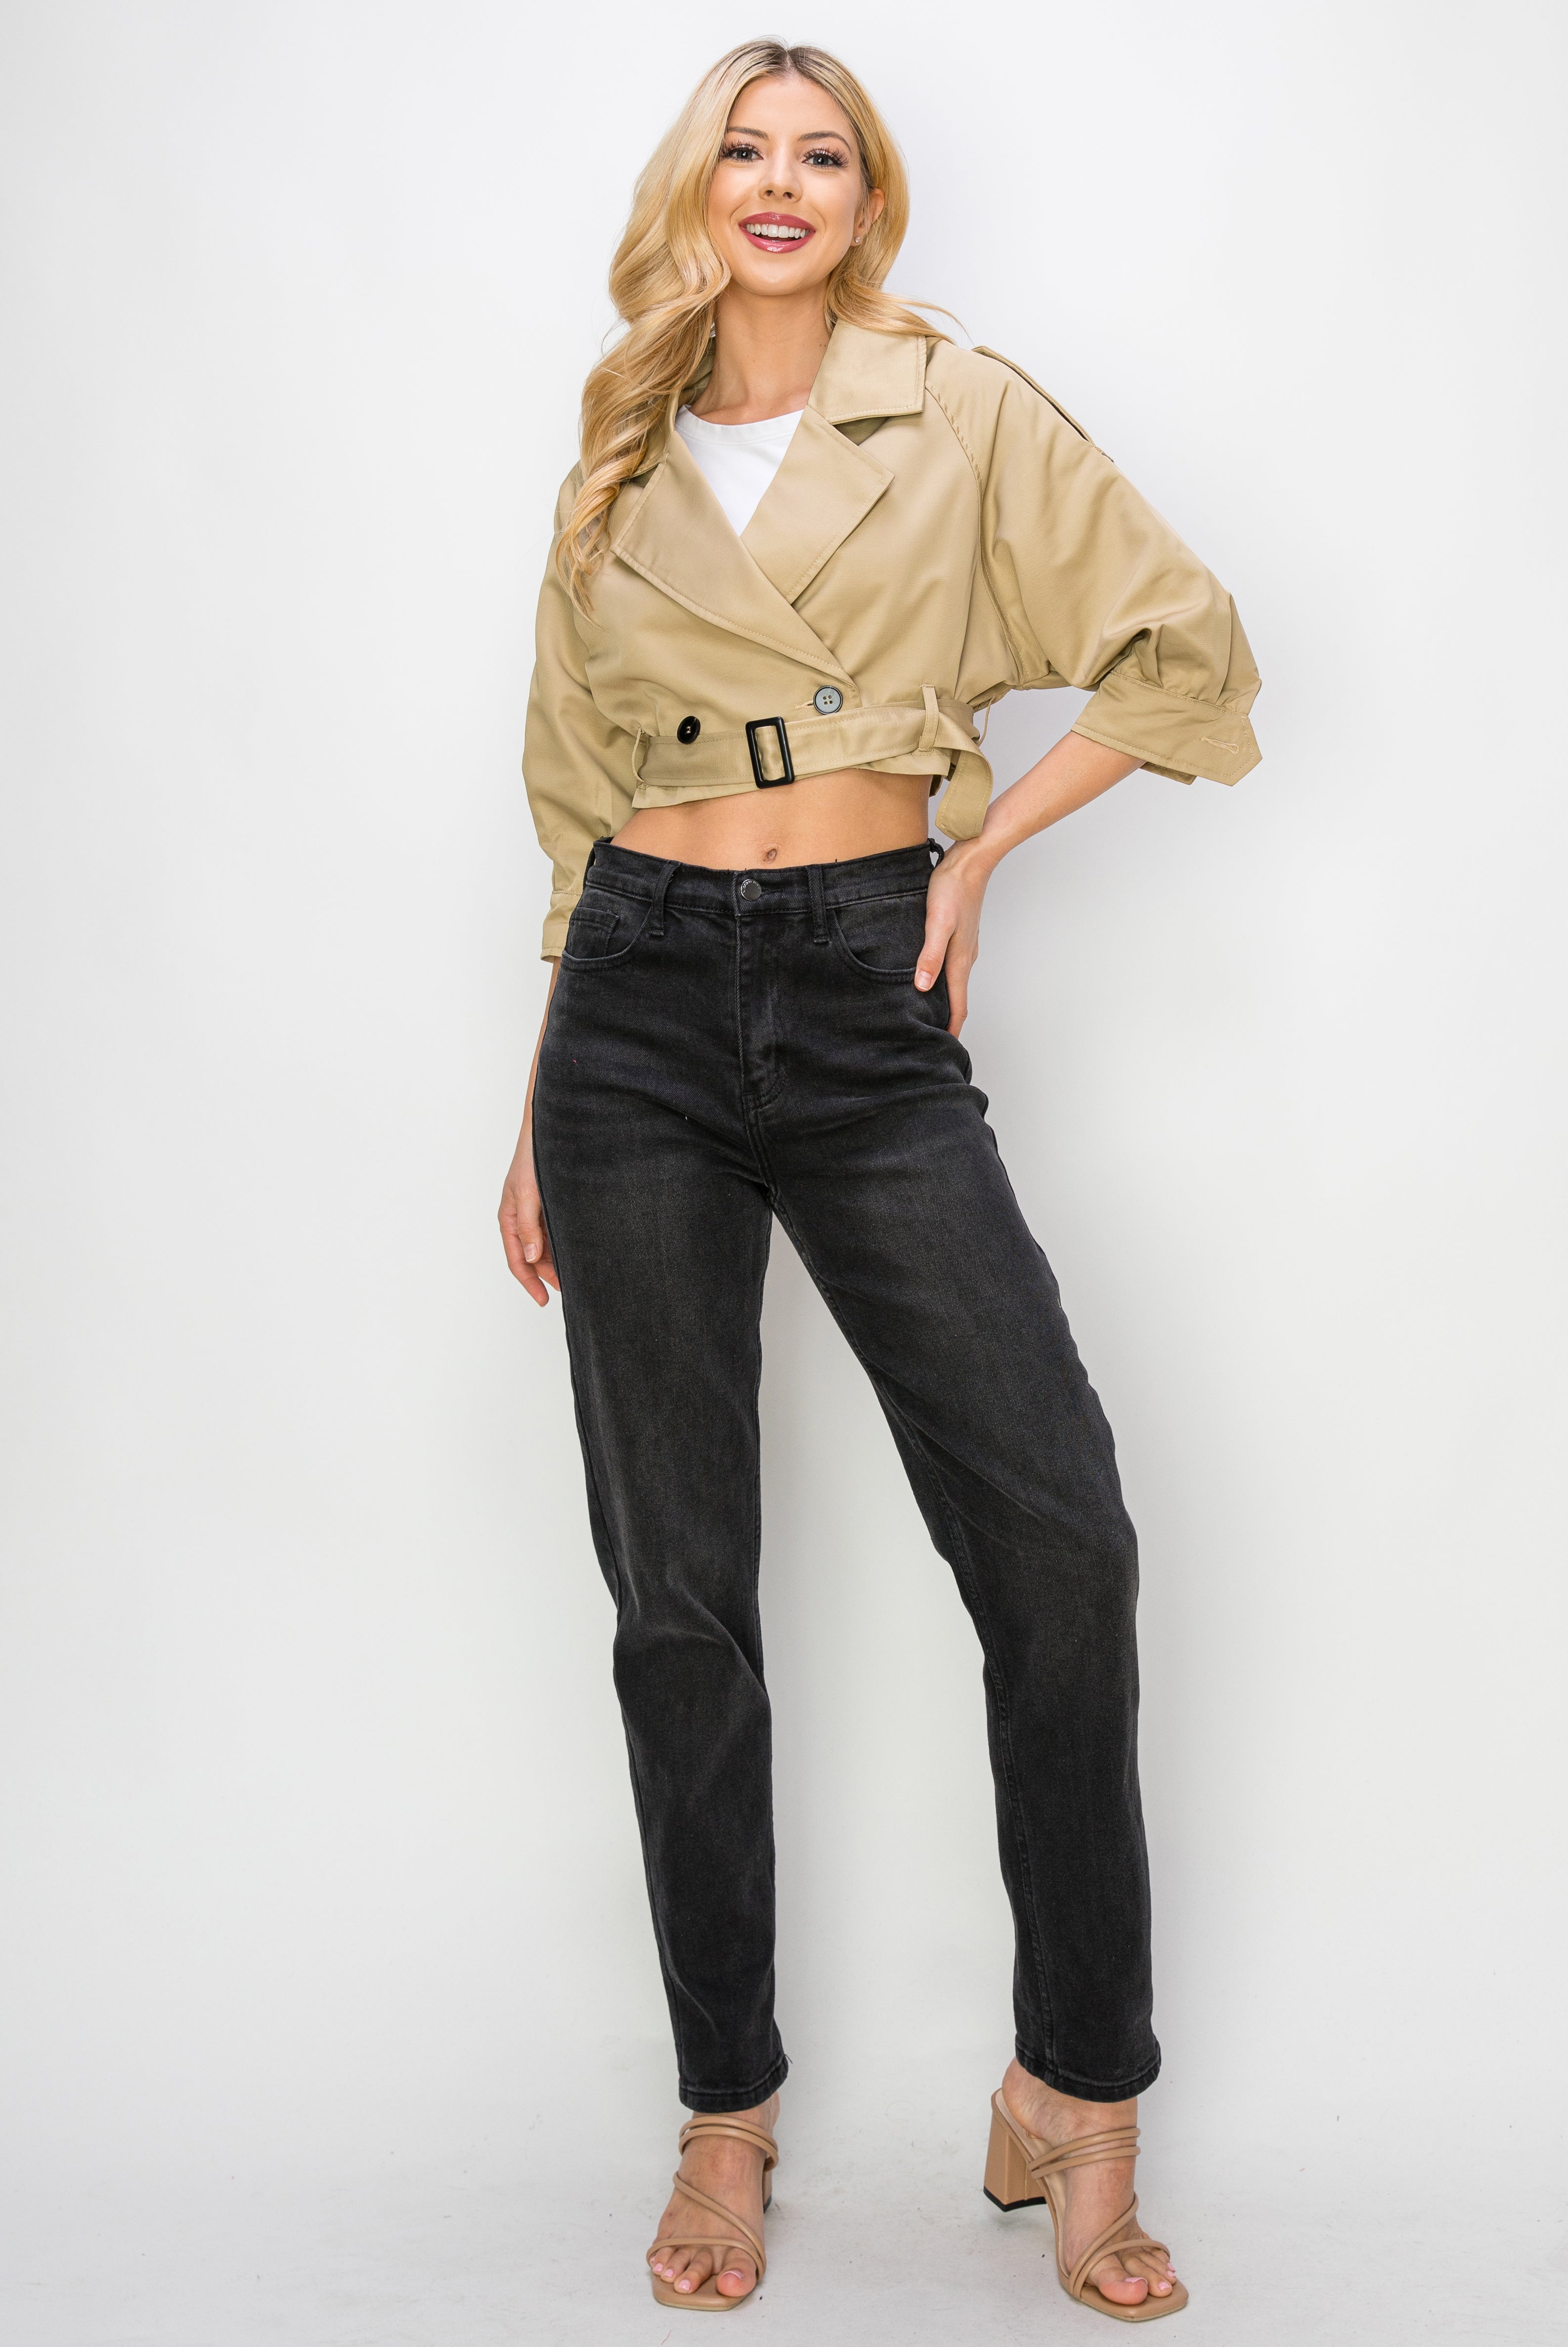 A model wearing a cropped trench jacket full body image against a white wall. 